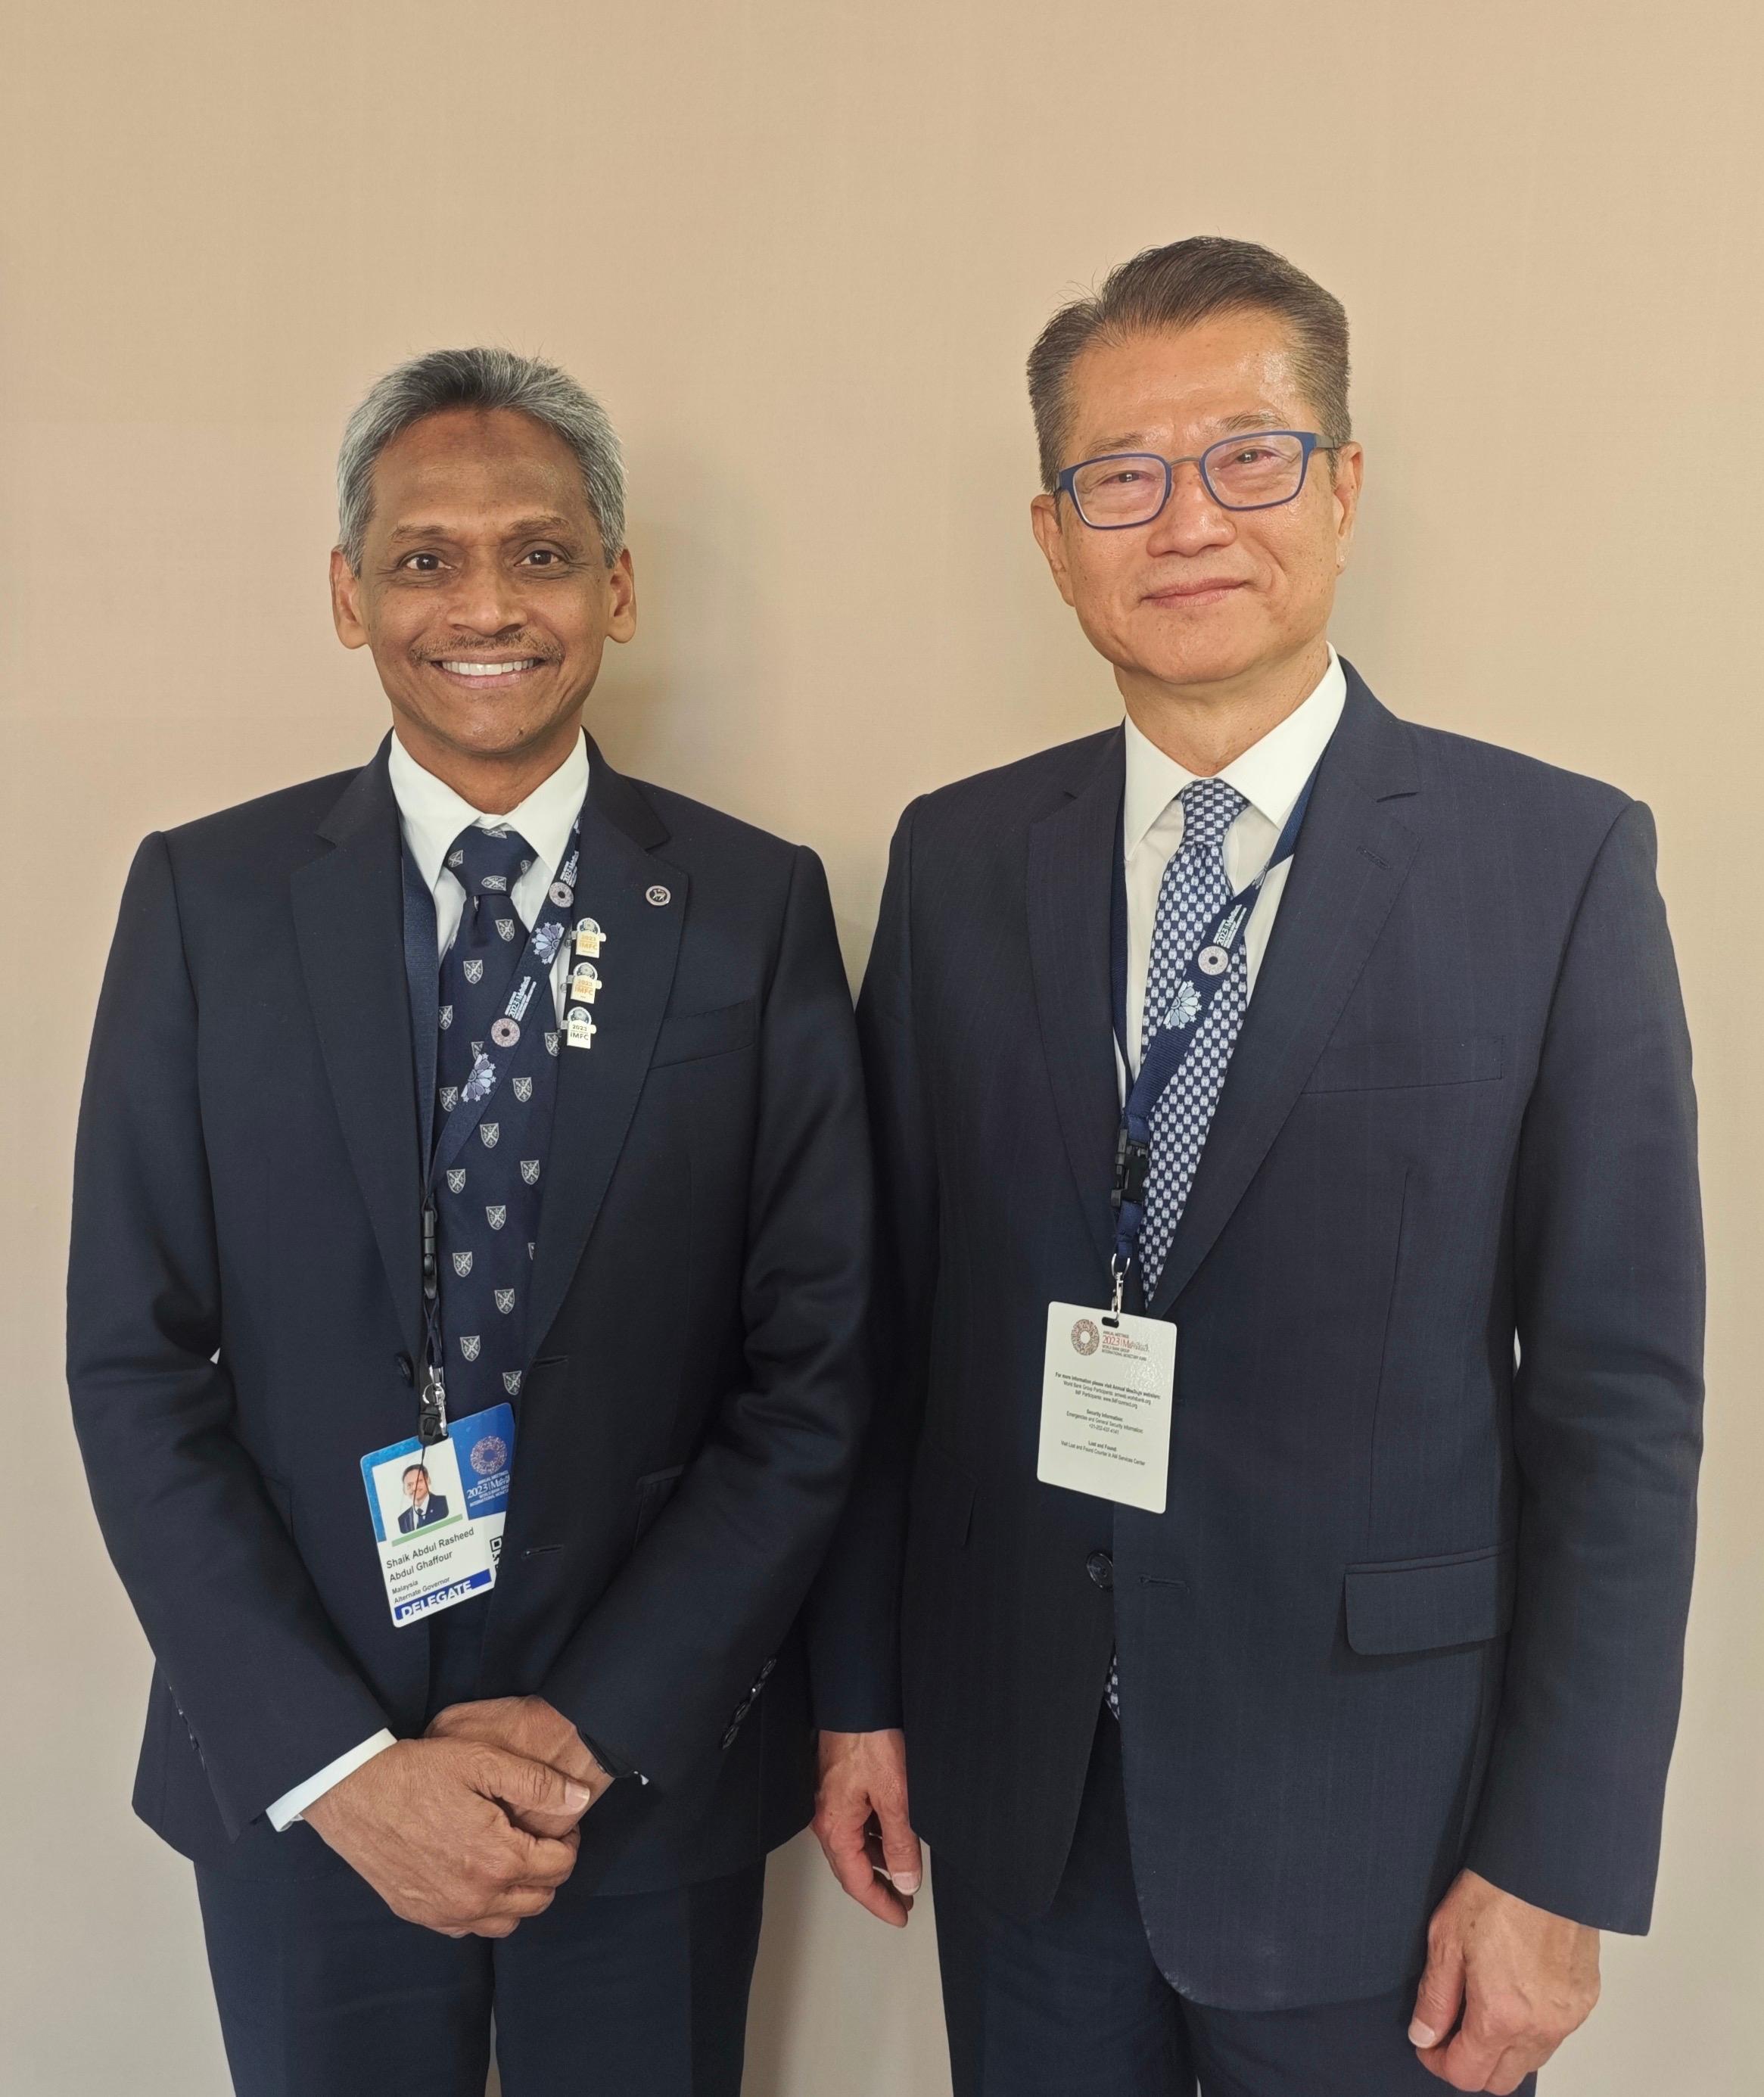 The Financial Secretary, Mr Paul Chan, continued to attend the 2023 Annual Meetings of the International Monetary Fund (IMF) and the World Bank Group (WBG) in Marrakech, Morocco, today (October 14, Marrakech time), as a member of the Chinese delegation. Photo shows Mr Chan (right) meeting with the Governor of the Central Bank of Malaysia, Mr Abdul Rasheed Ghaffour (left).